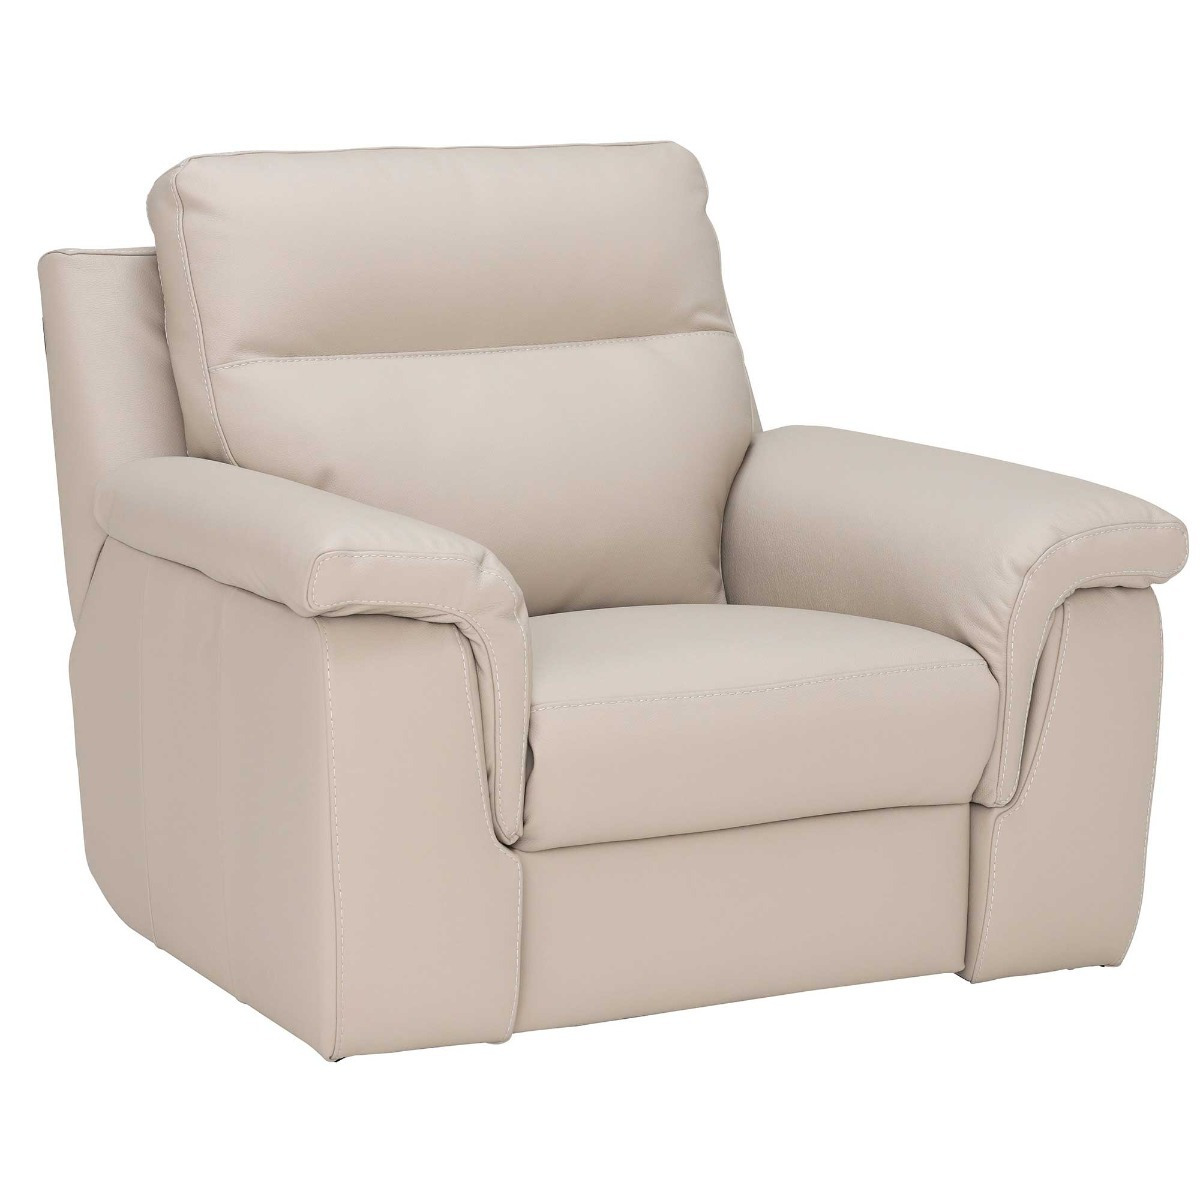 Fulton Recliner Chair, Neutral - Barker & Stonehouse - image 1